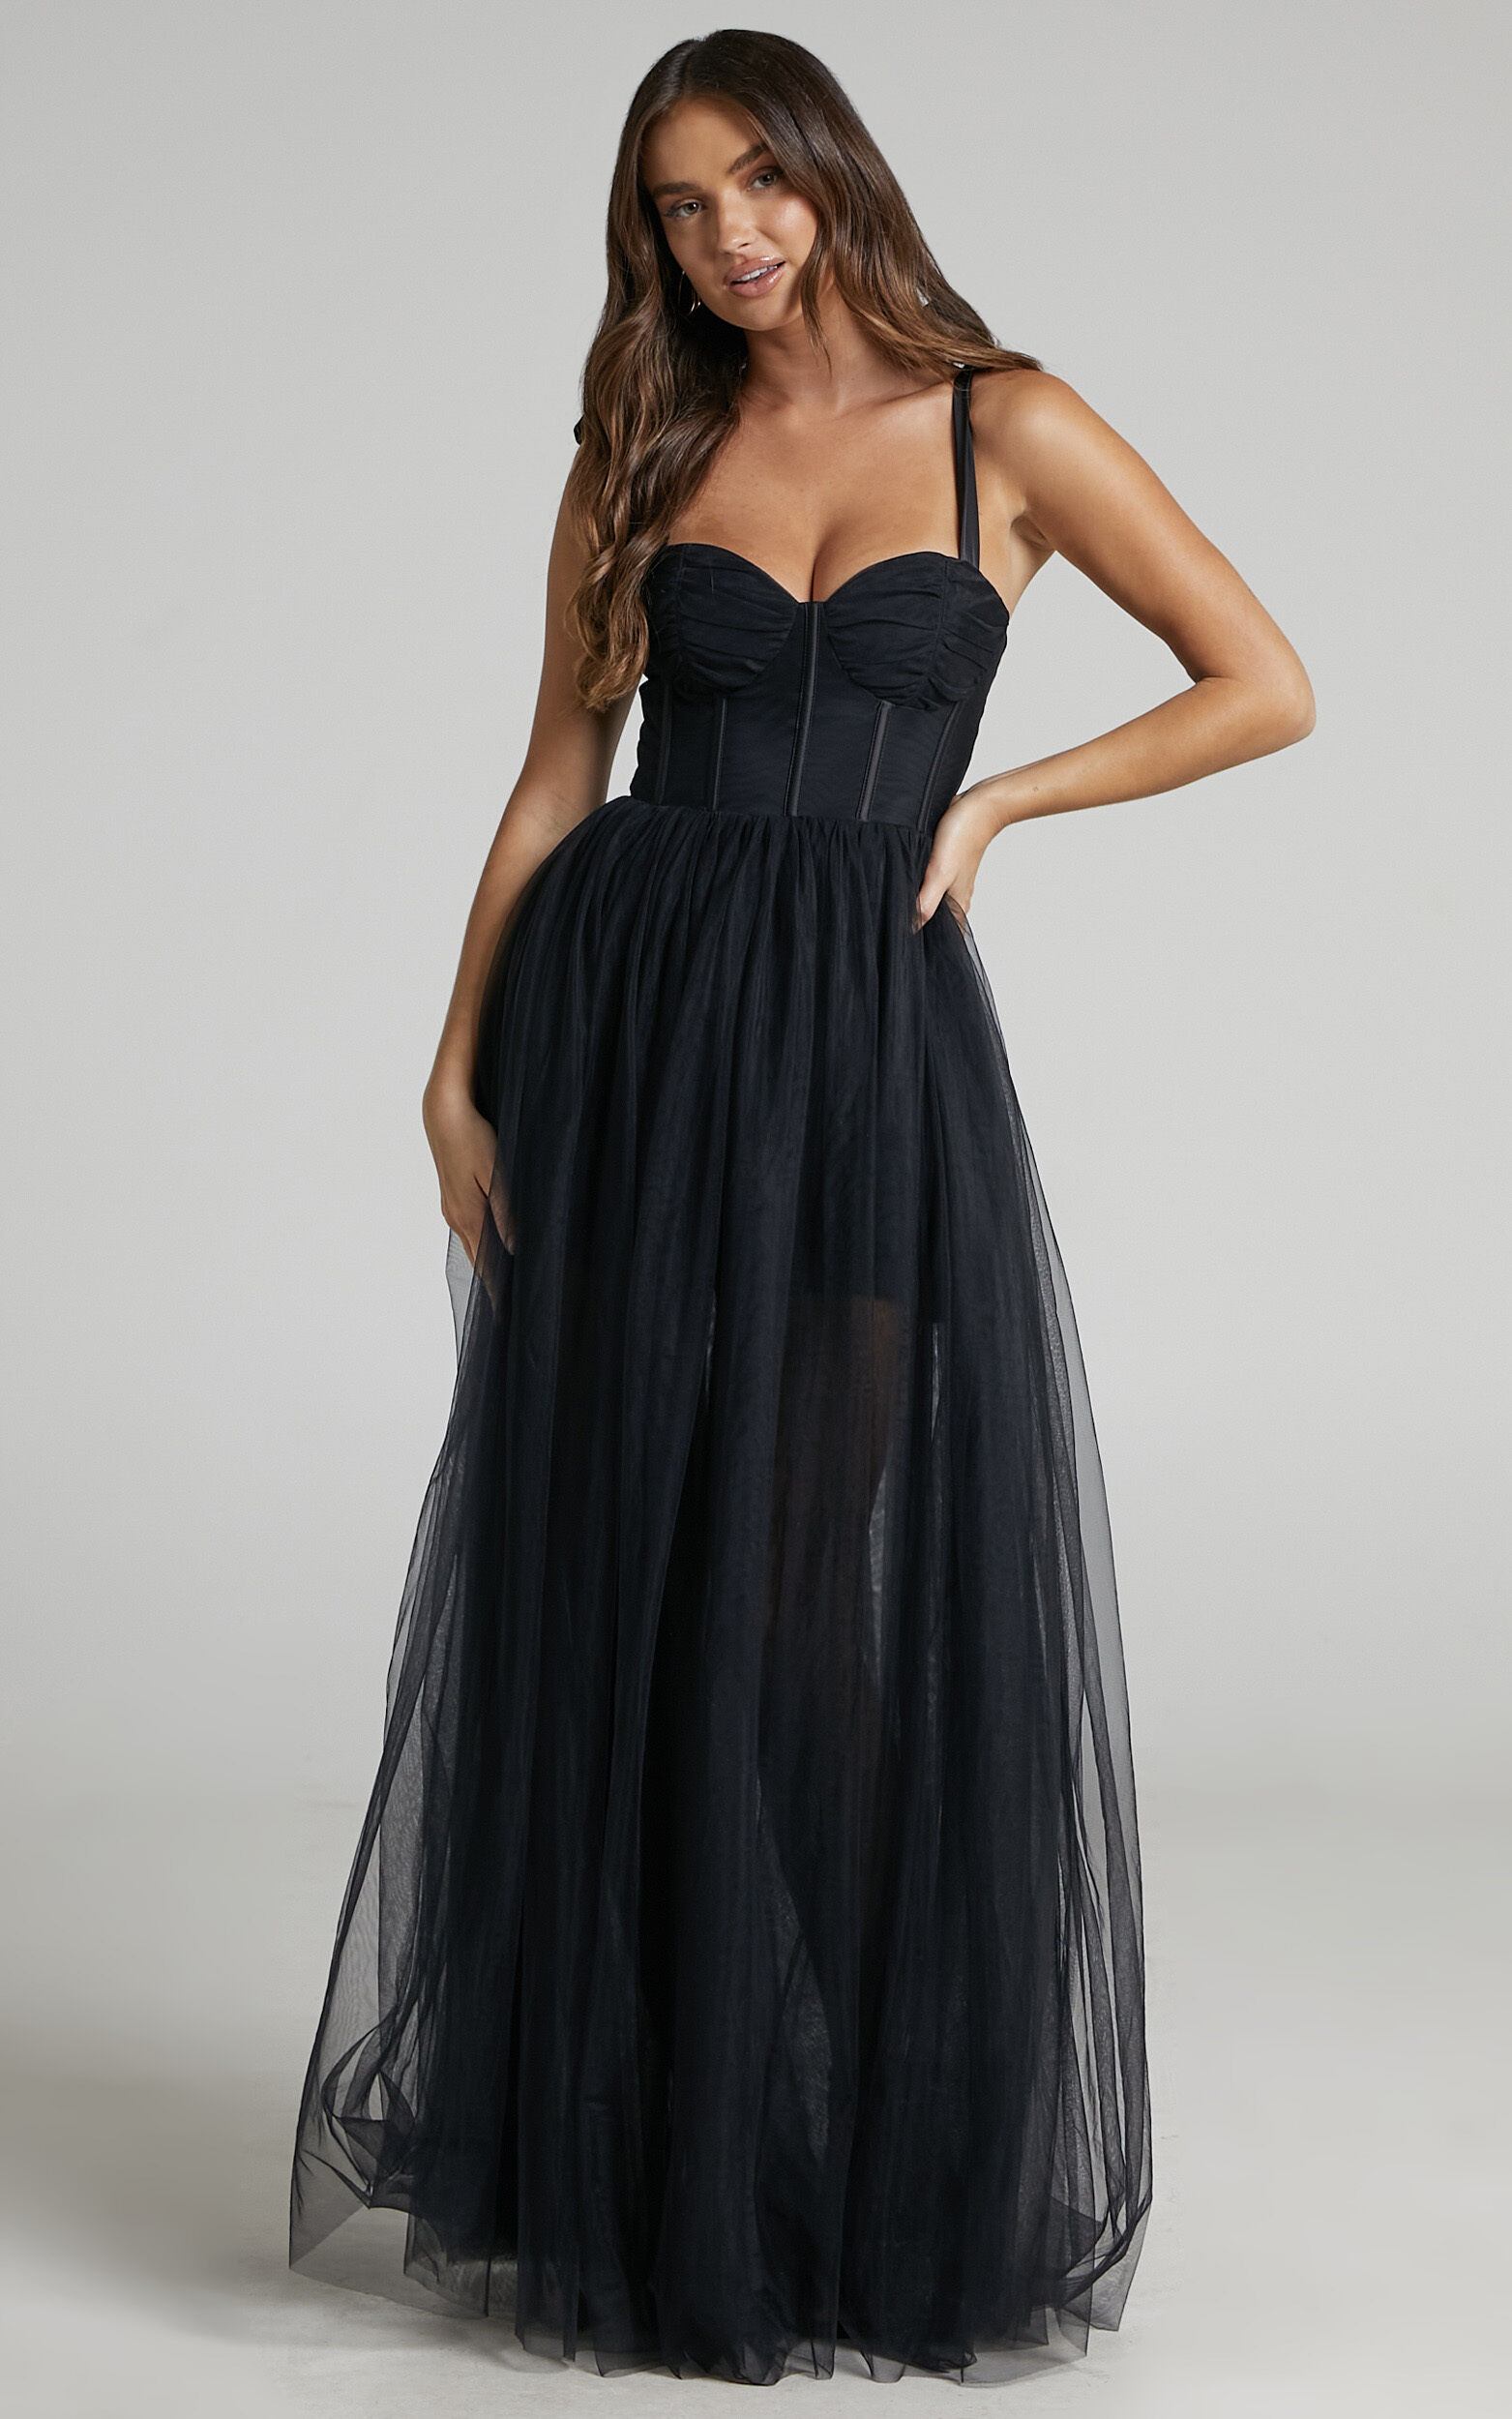 Emmary Bustier Bodice Tulle Gown in Black - 06, BLK1, super-hi-res image number null